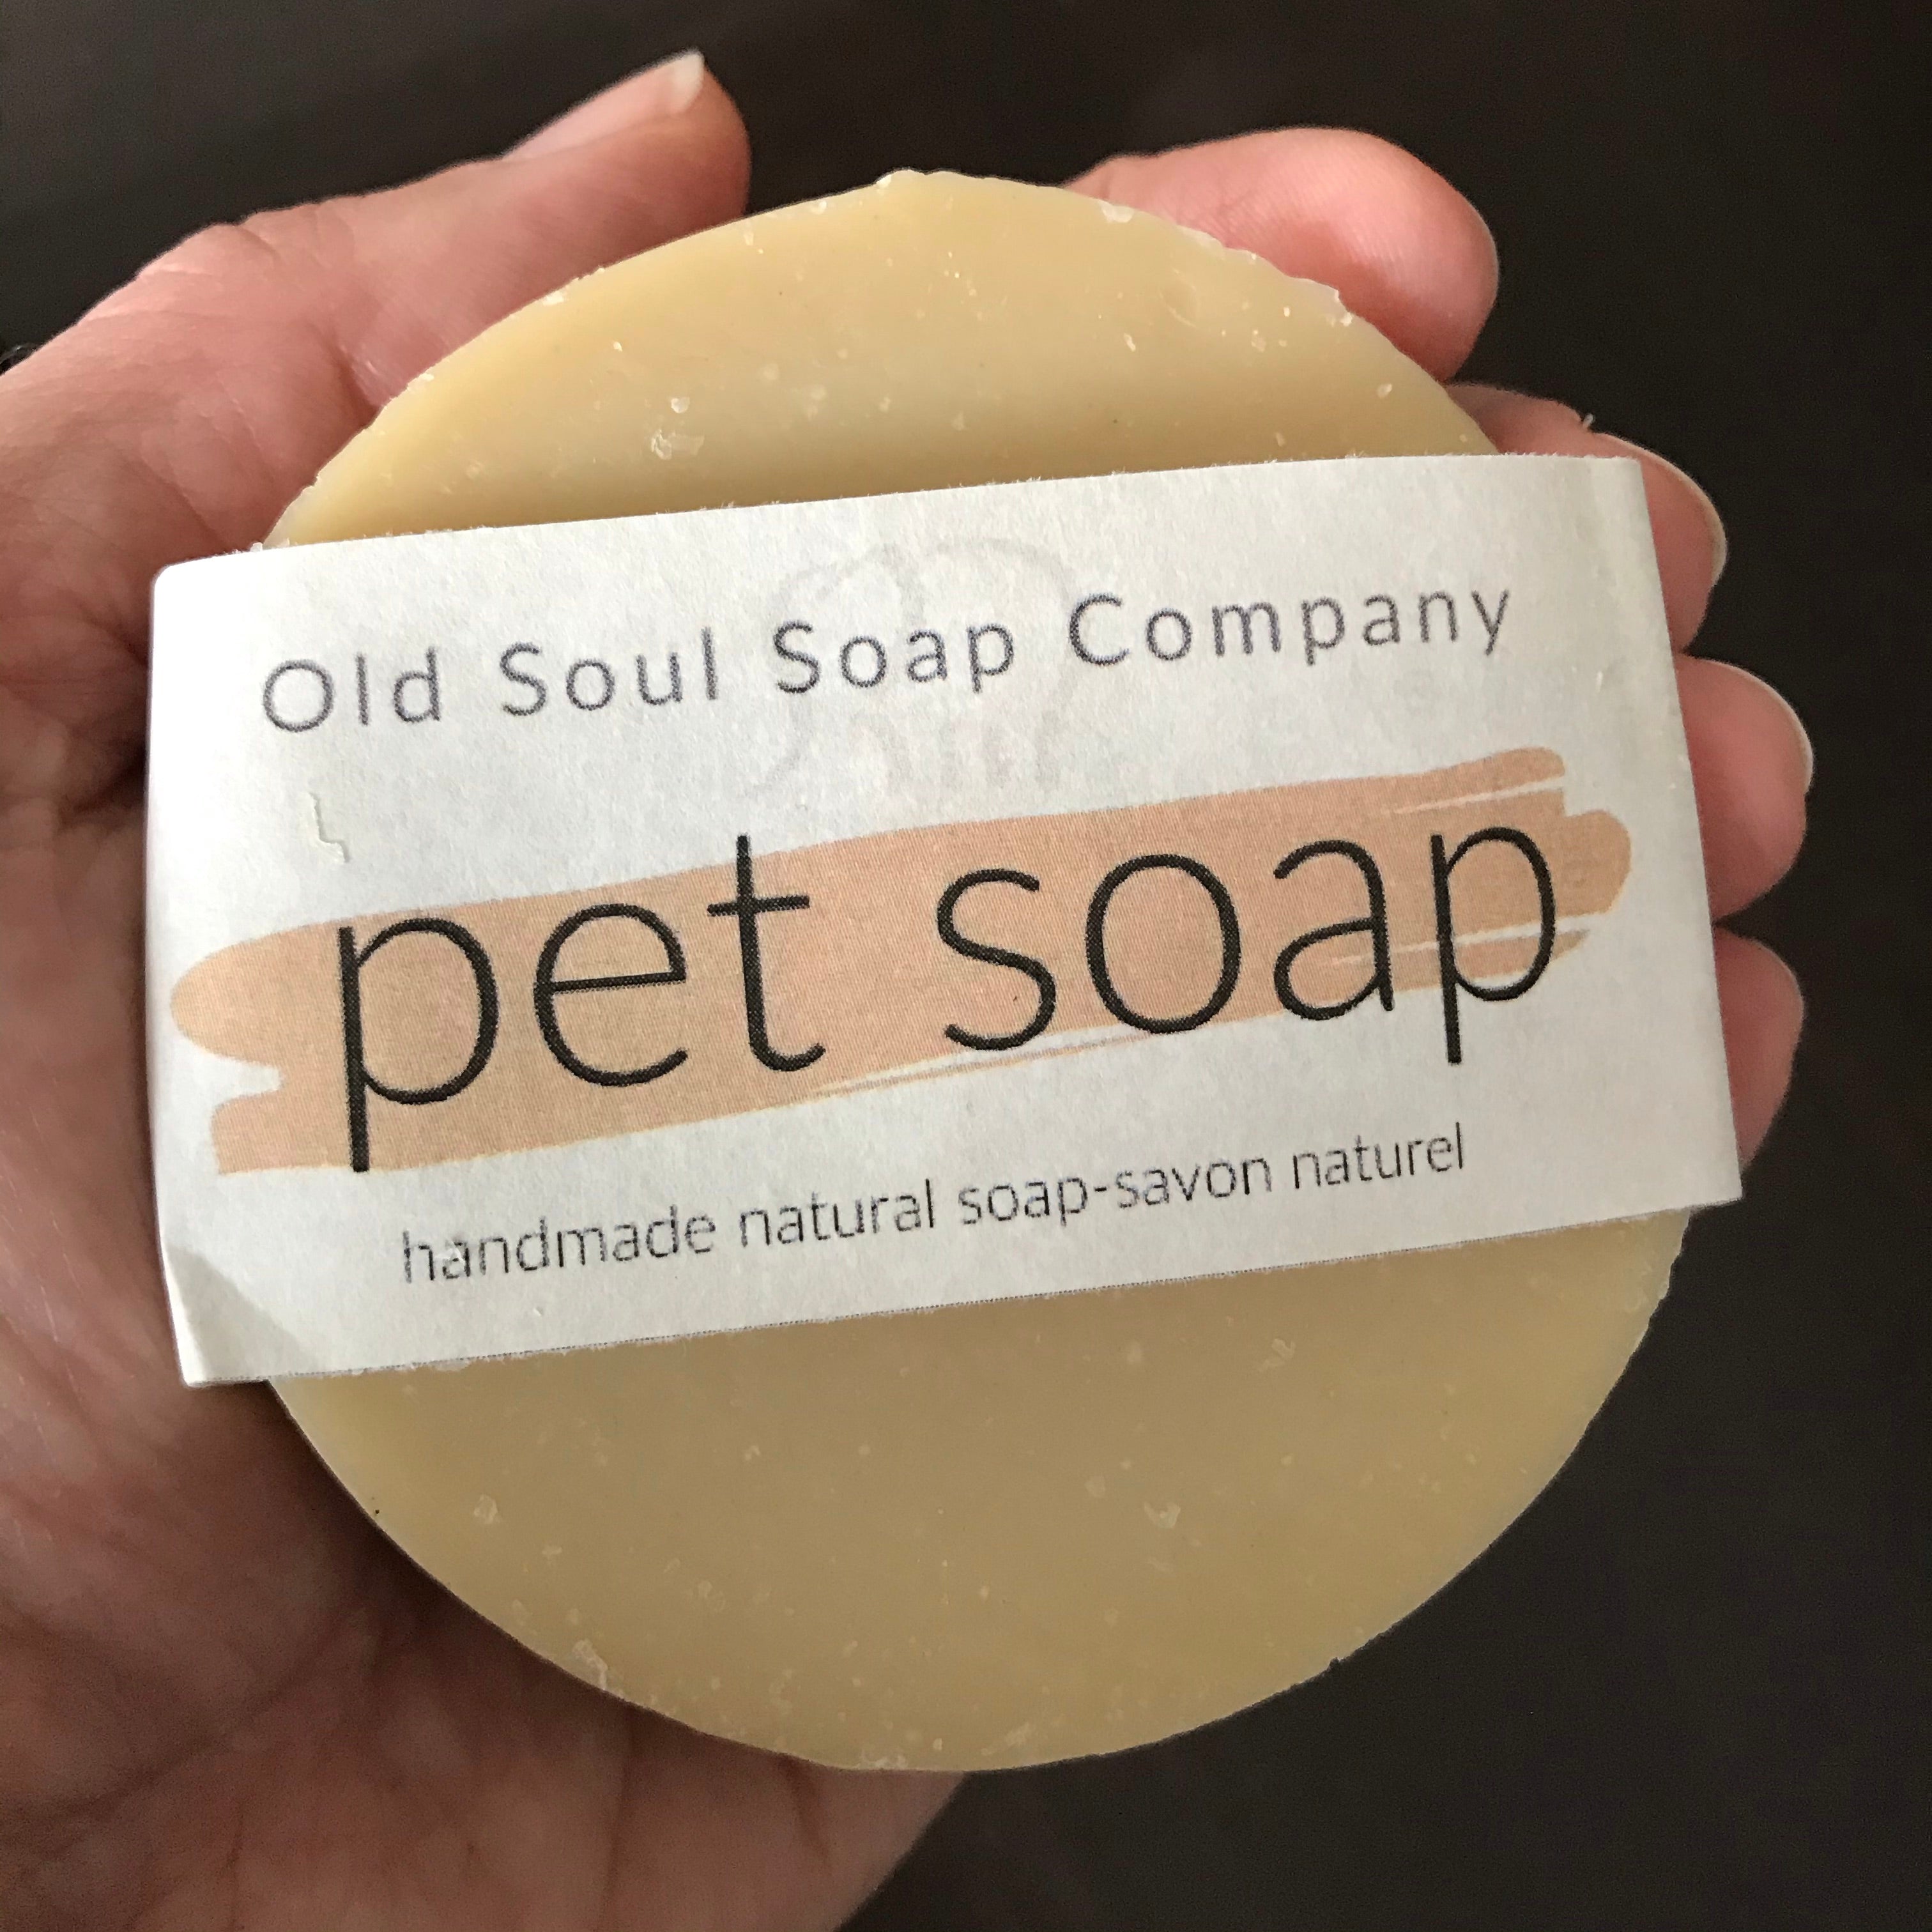 canadian made natural pet soap with neem oil to help repel fleas and ticks